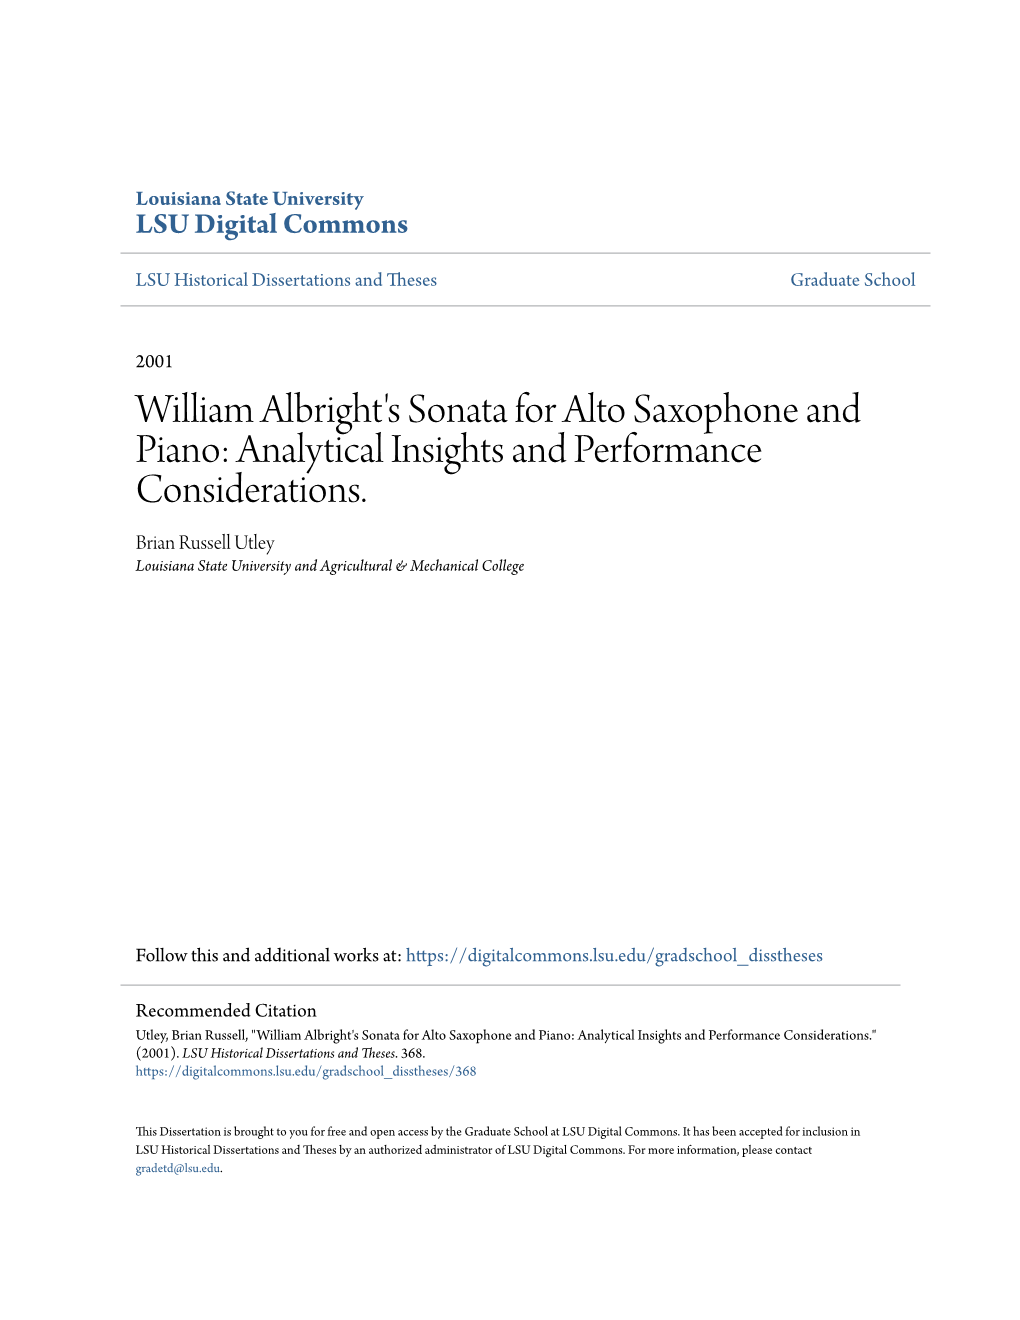 William Albright's Sonata for Alto Saxophone and Piano: Analytical Insights and Performance Considerations